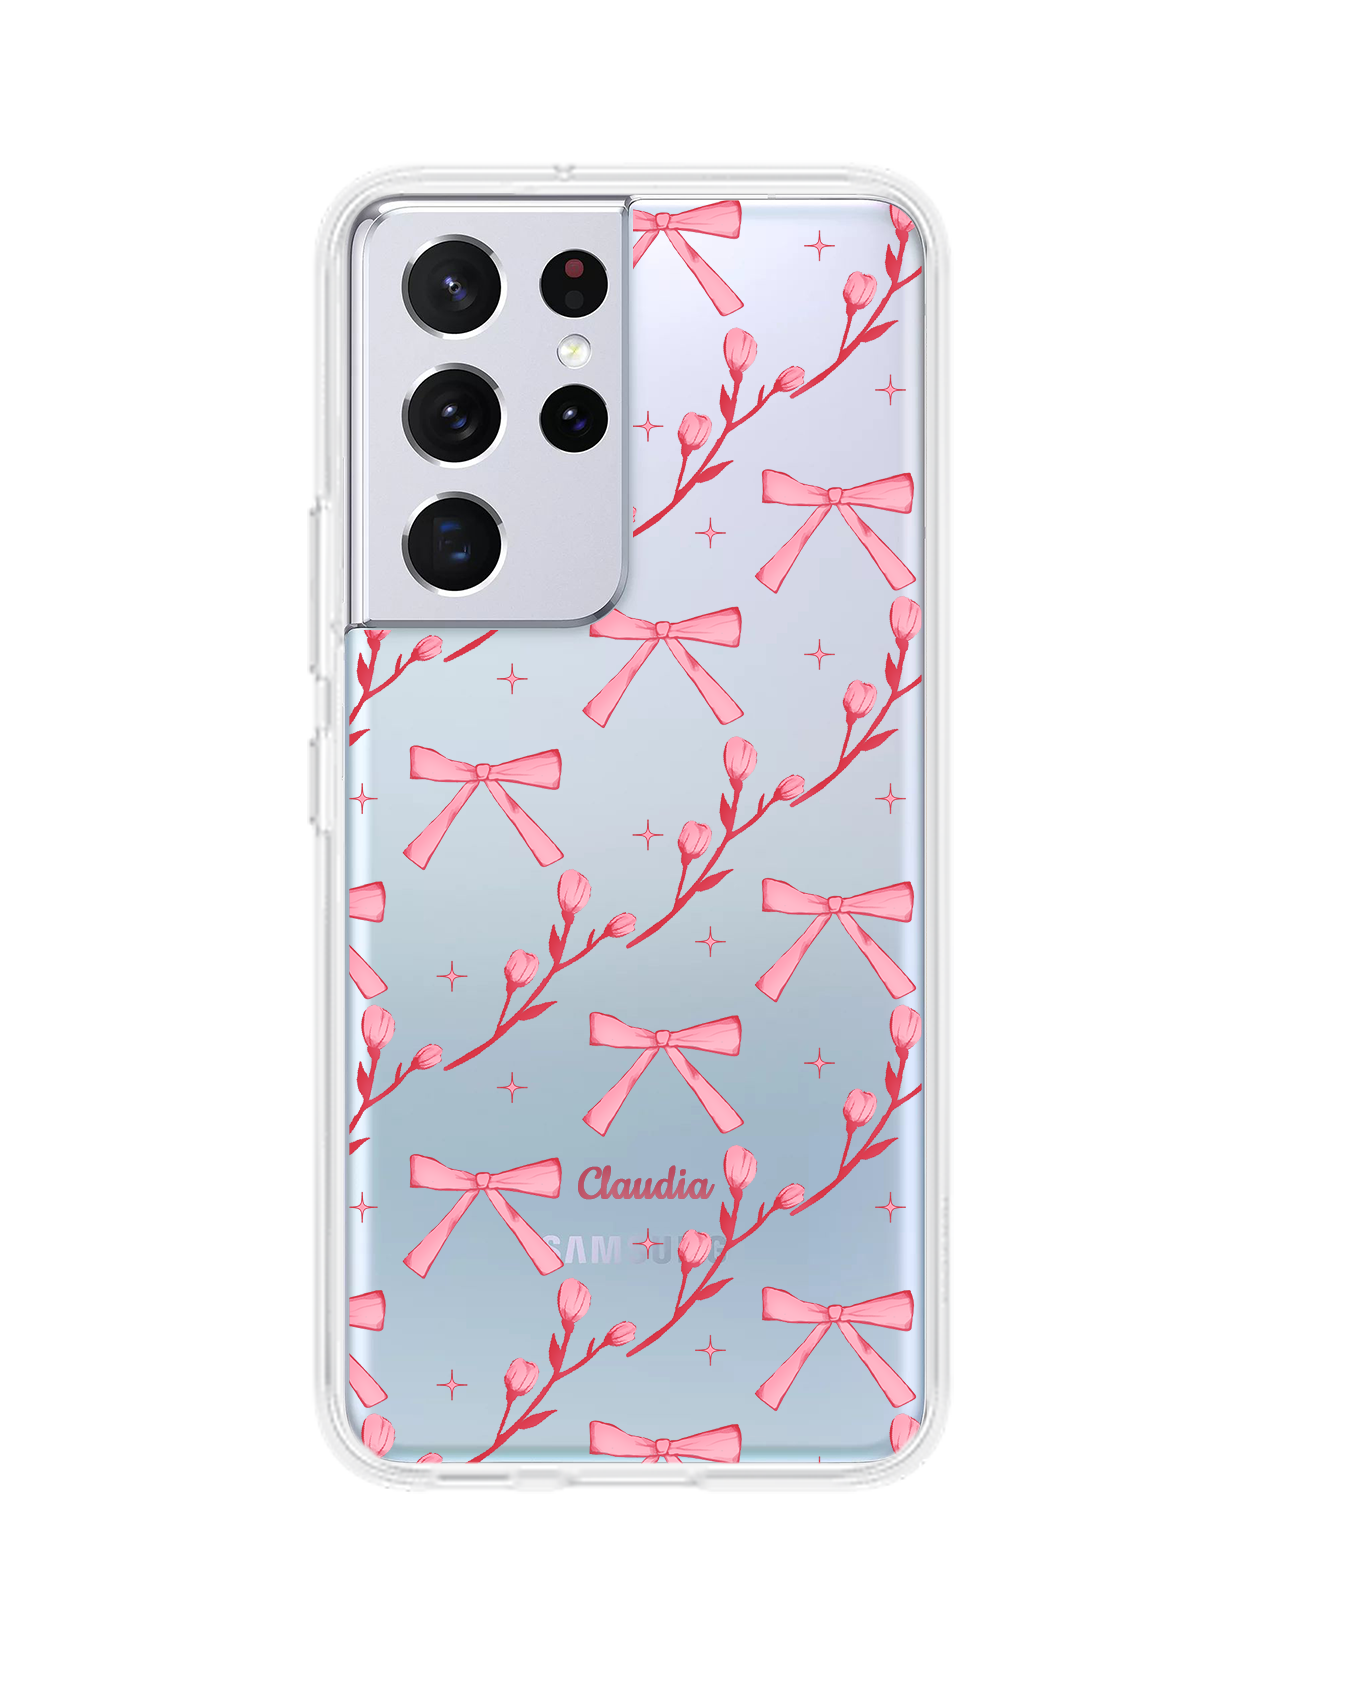 Android Rearguard Hybrid Case - Coquette Floral